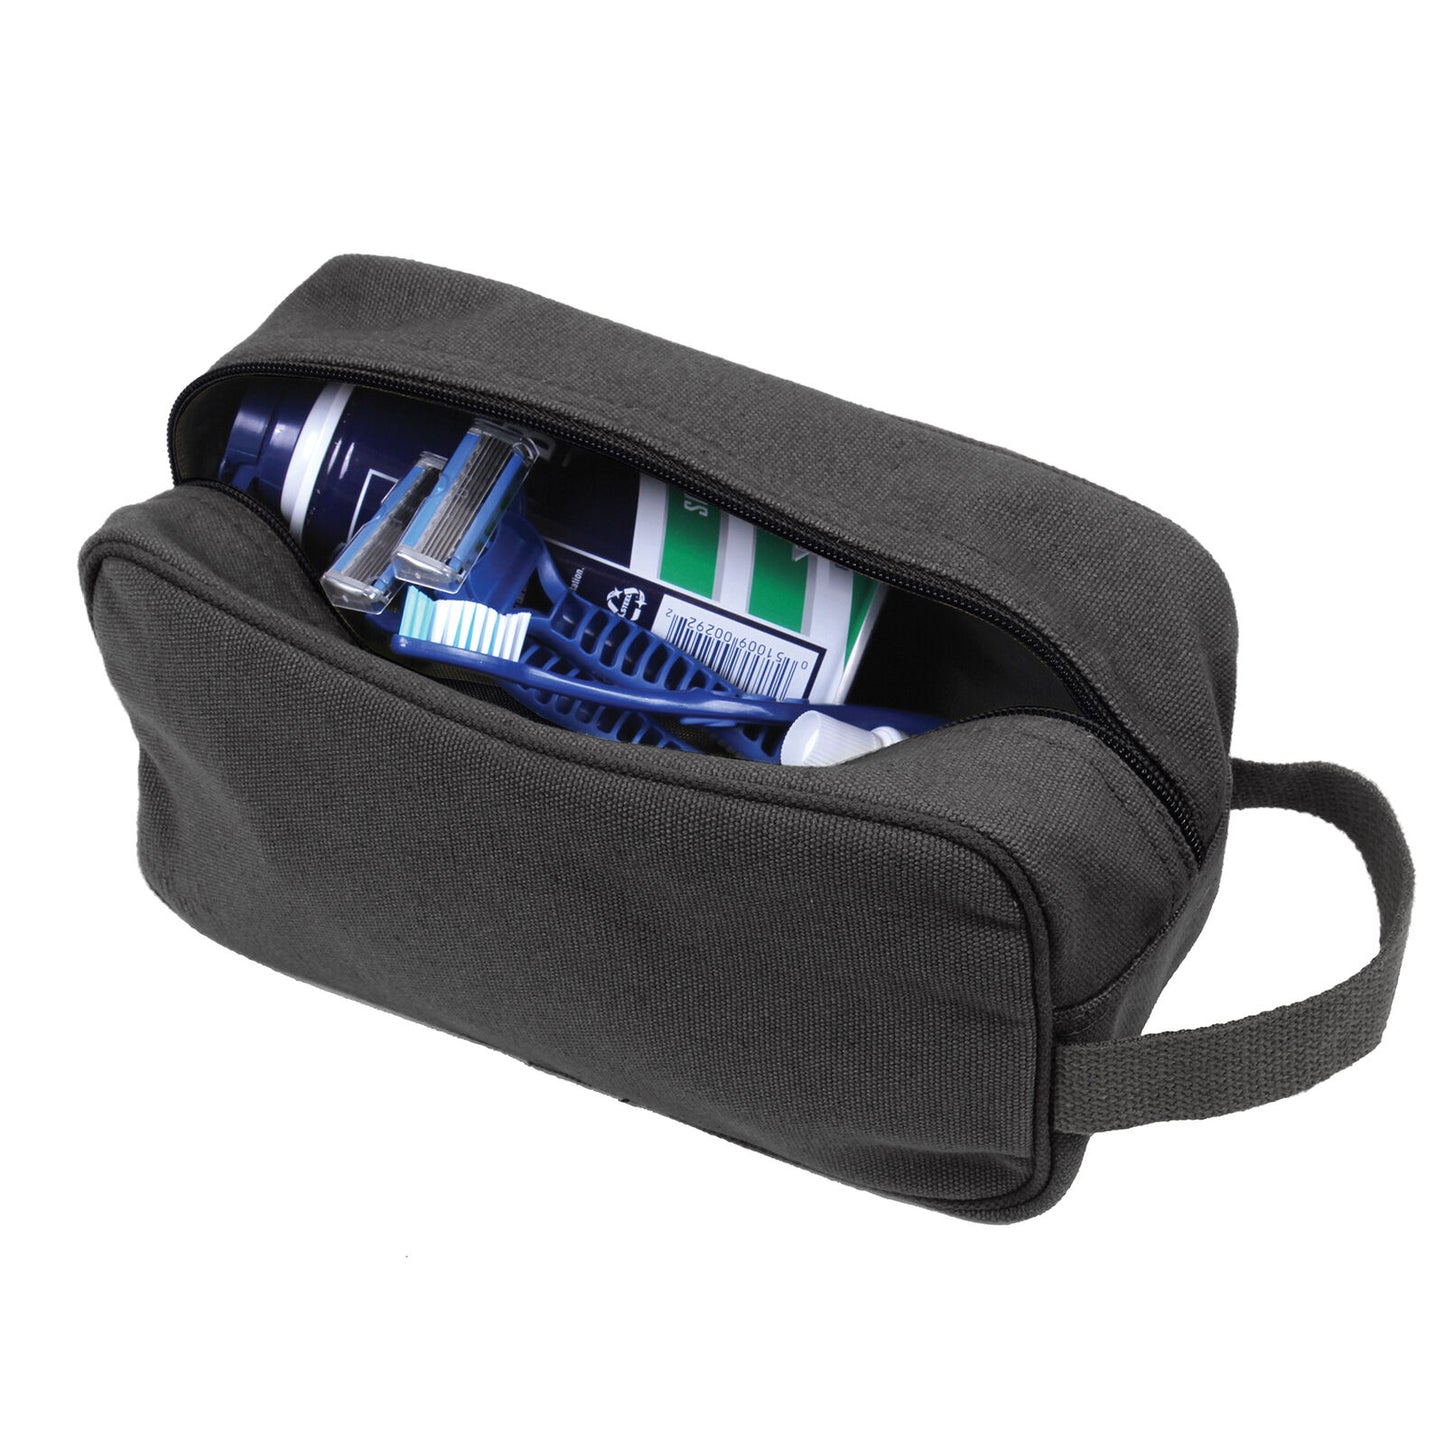 Charcoal Grey Tactical Travel Toiletry Bag Zippered Canvas